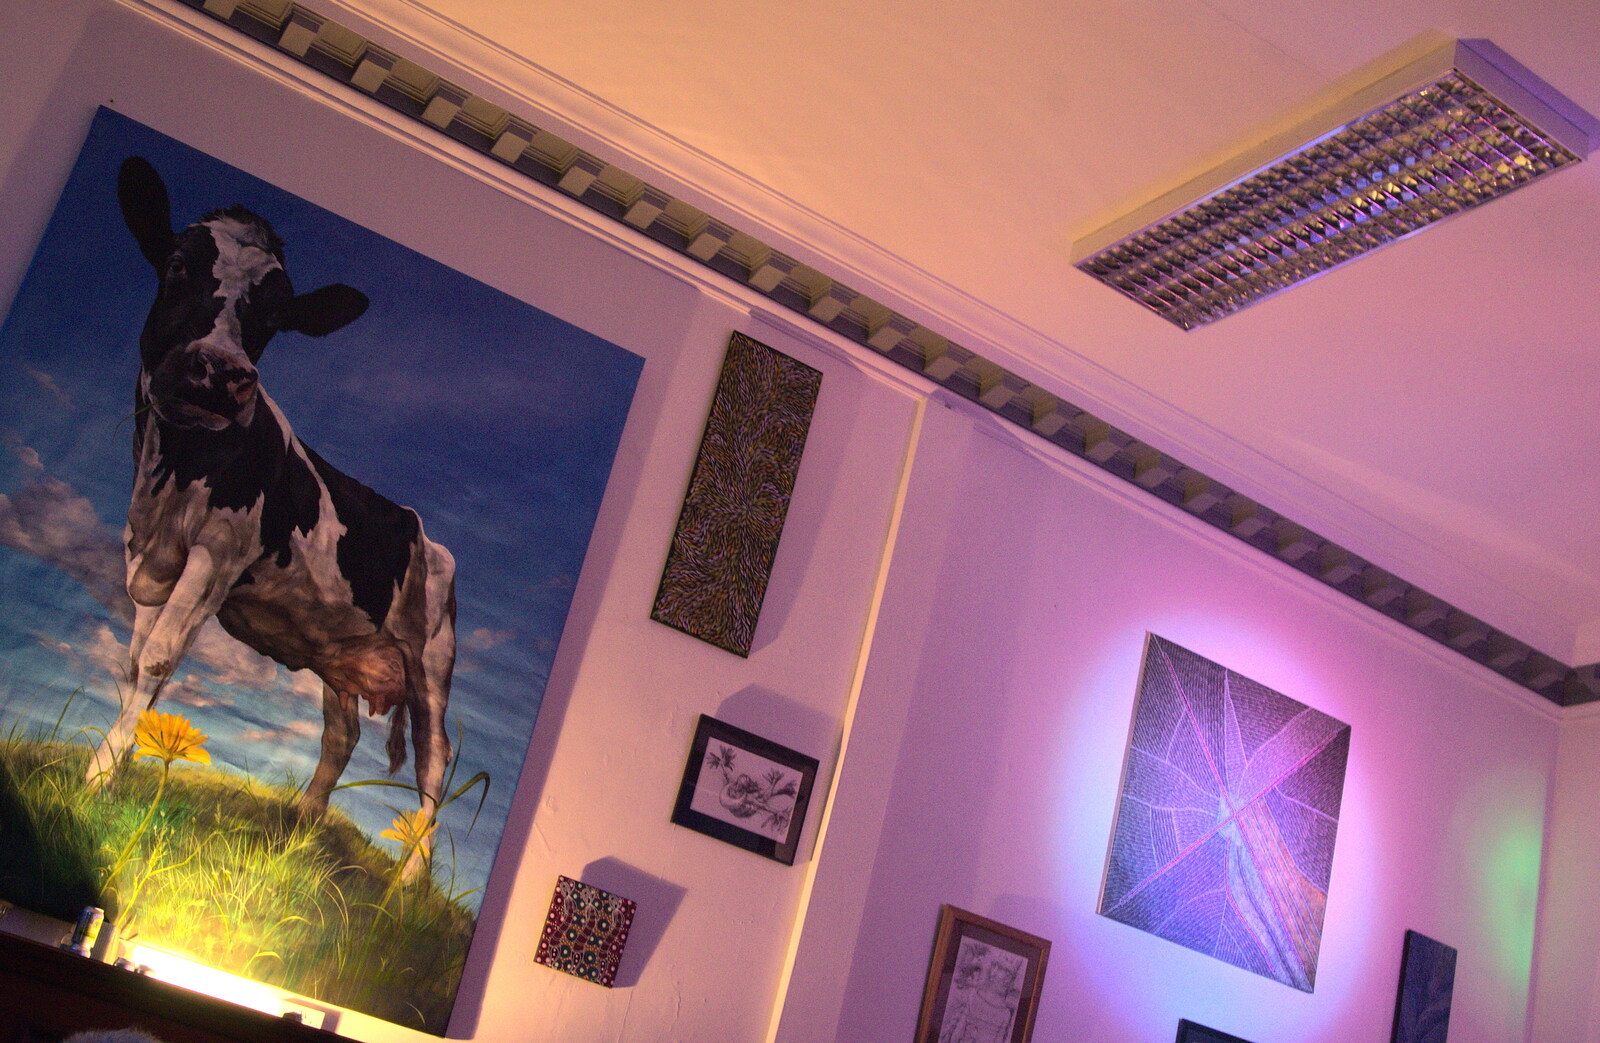 Cool cow picture on the wall from A Night at the Bank, and a Building Update, Brome and Eye, Suffolk - 7th February 2014